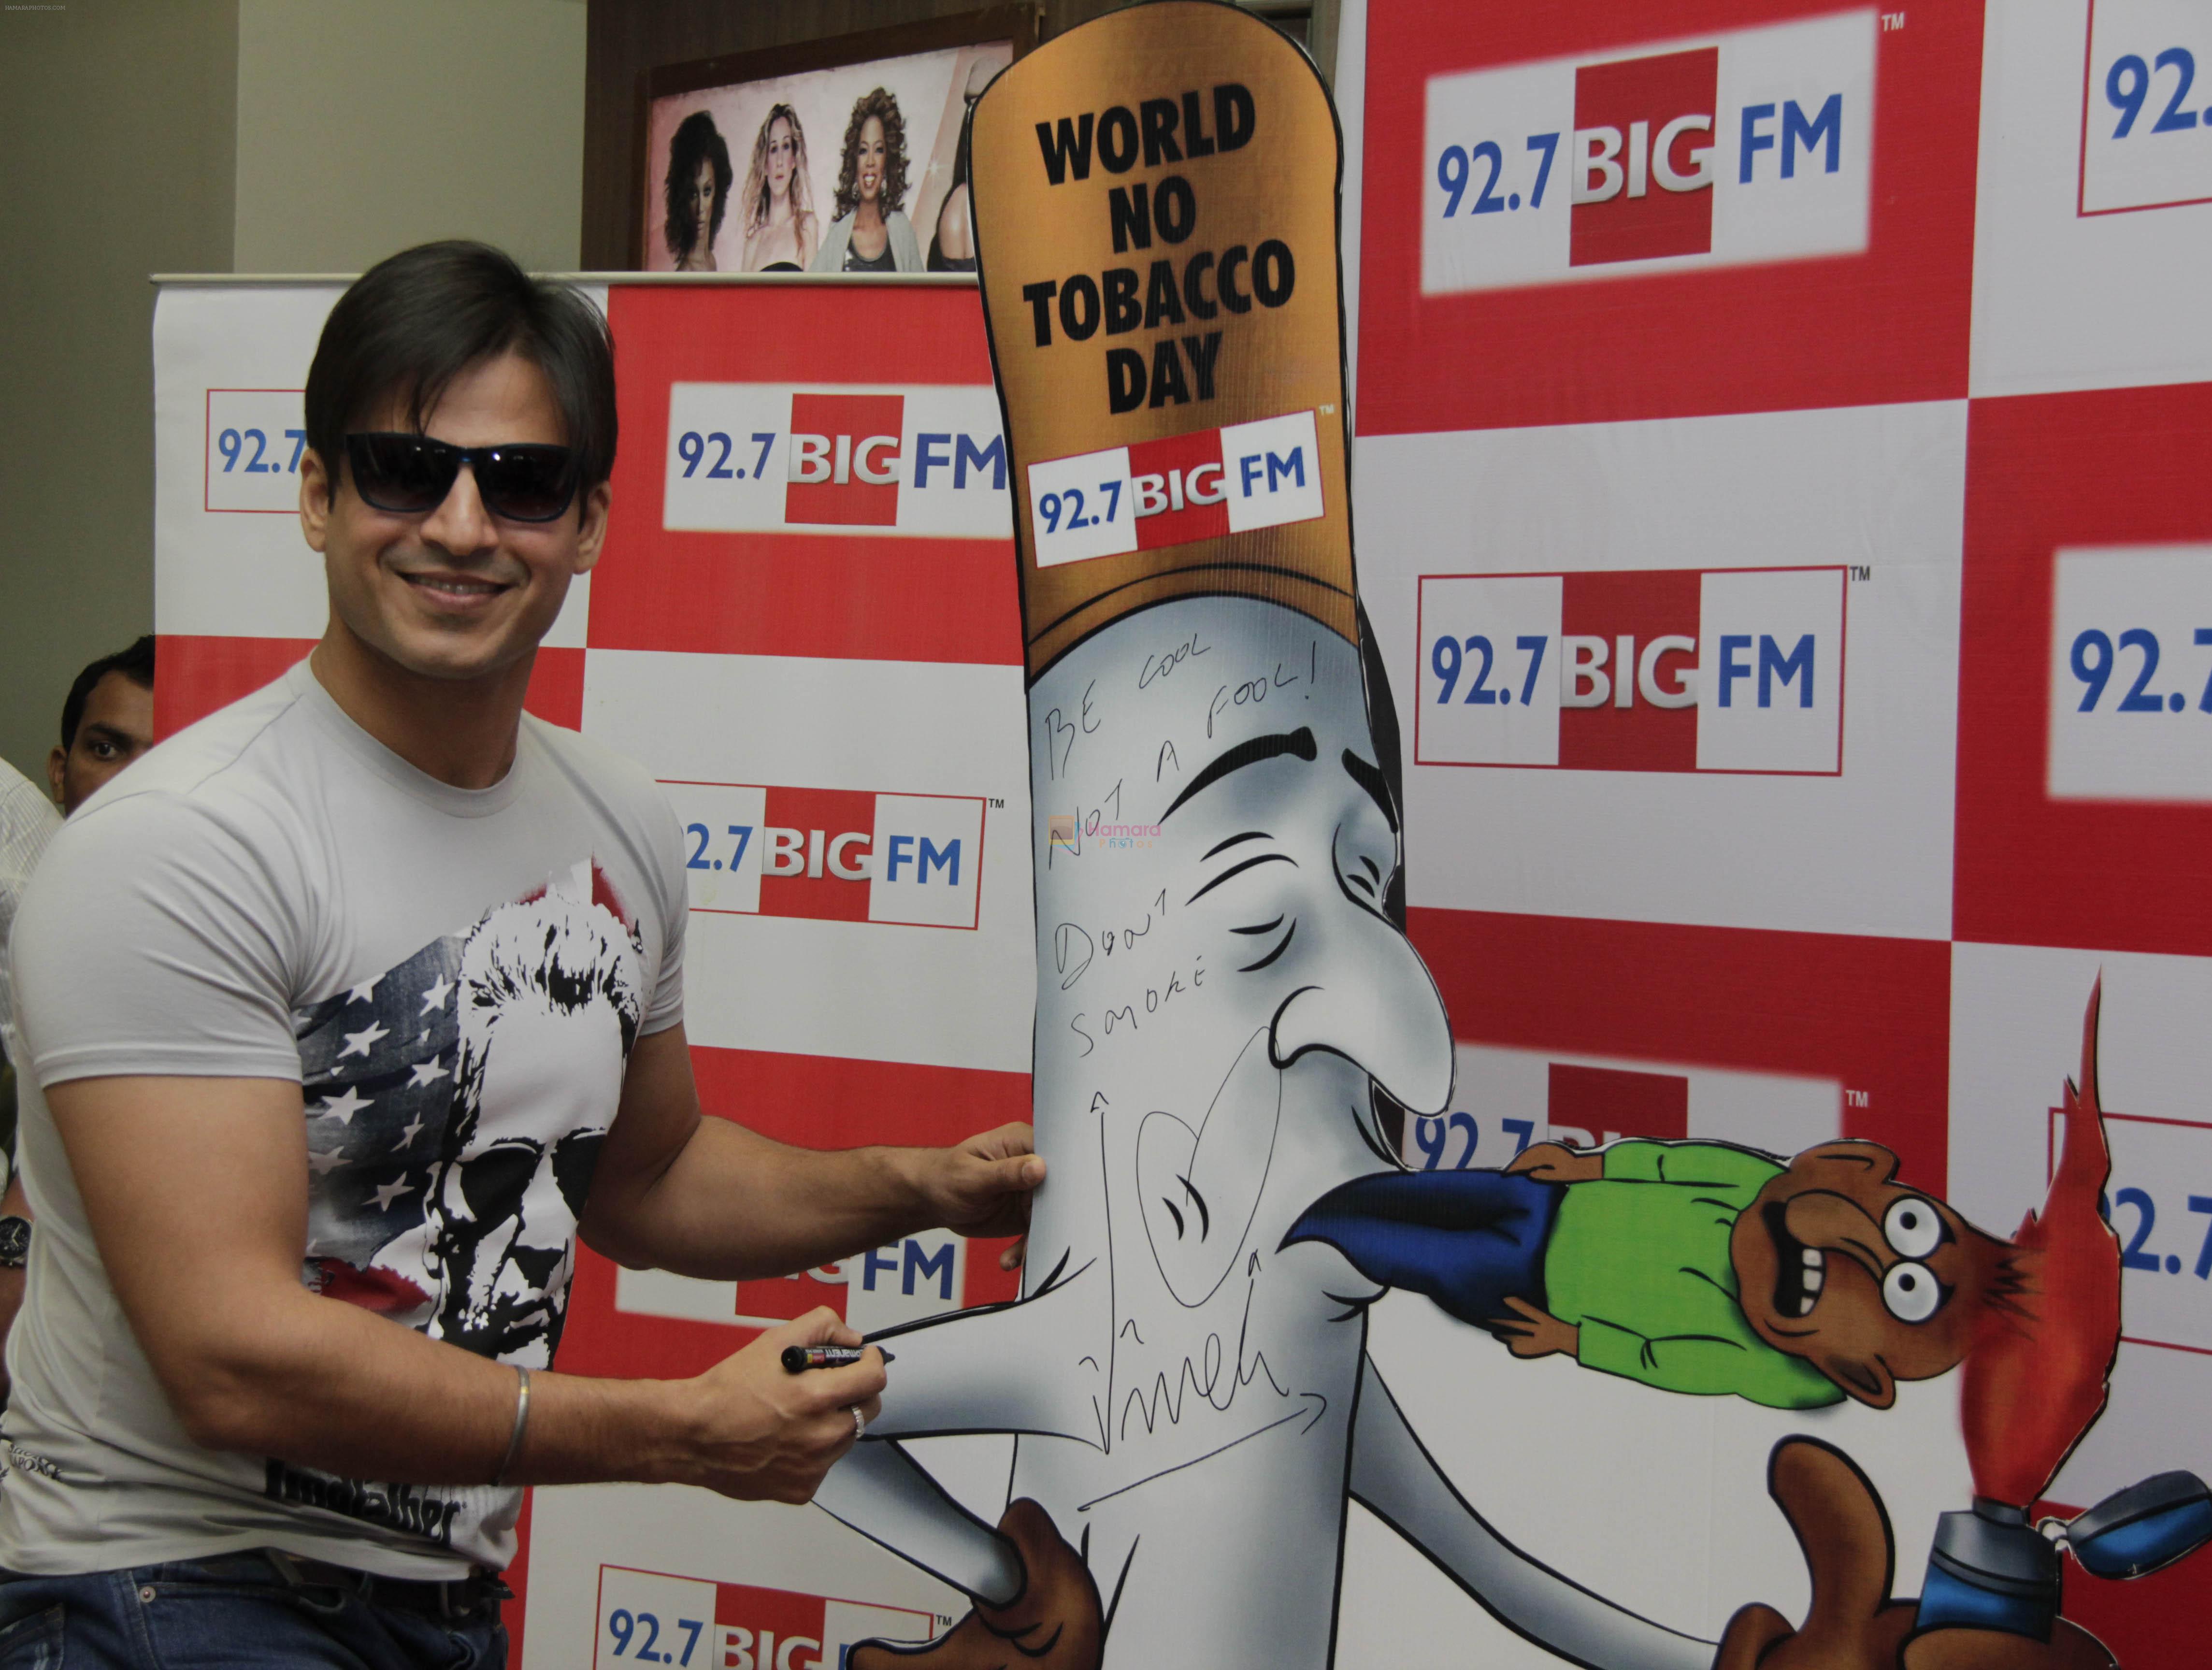 Vivek Oberoi flags off Cigaretter Bhujao, Life Banao campaign on World No Tobacco Day in Mumbai on 30th May 2012